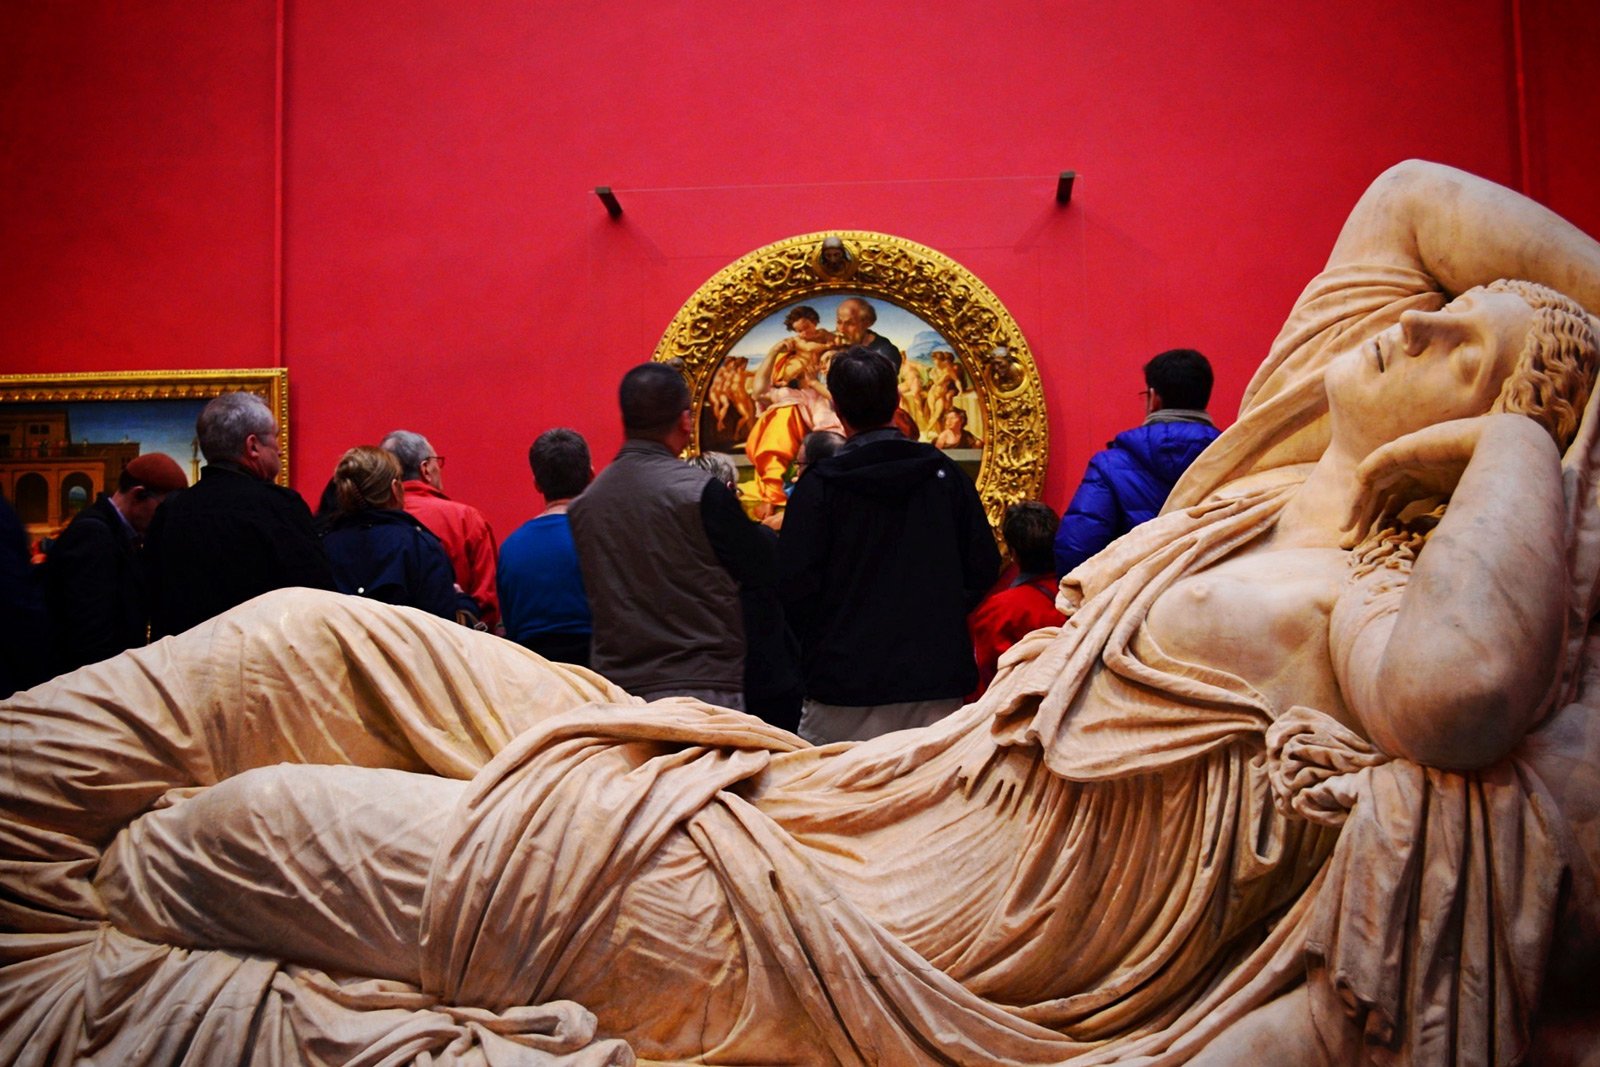 How to see the masterpieces in the Uffizi Gallery in Florence